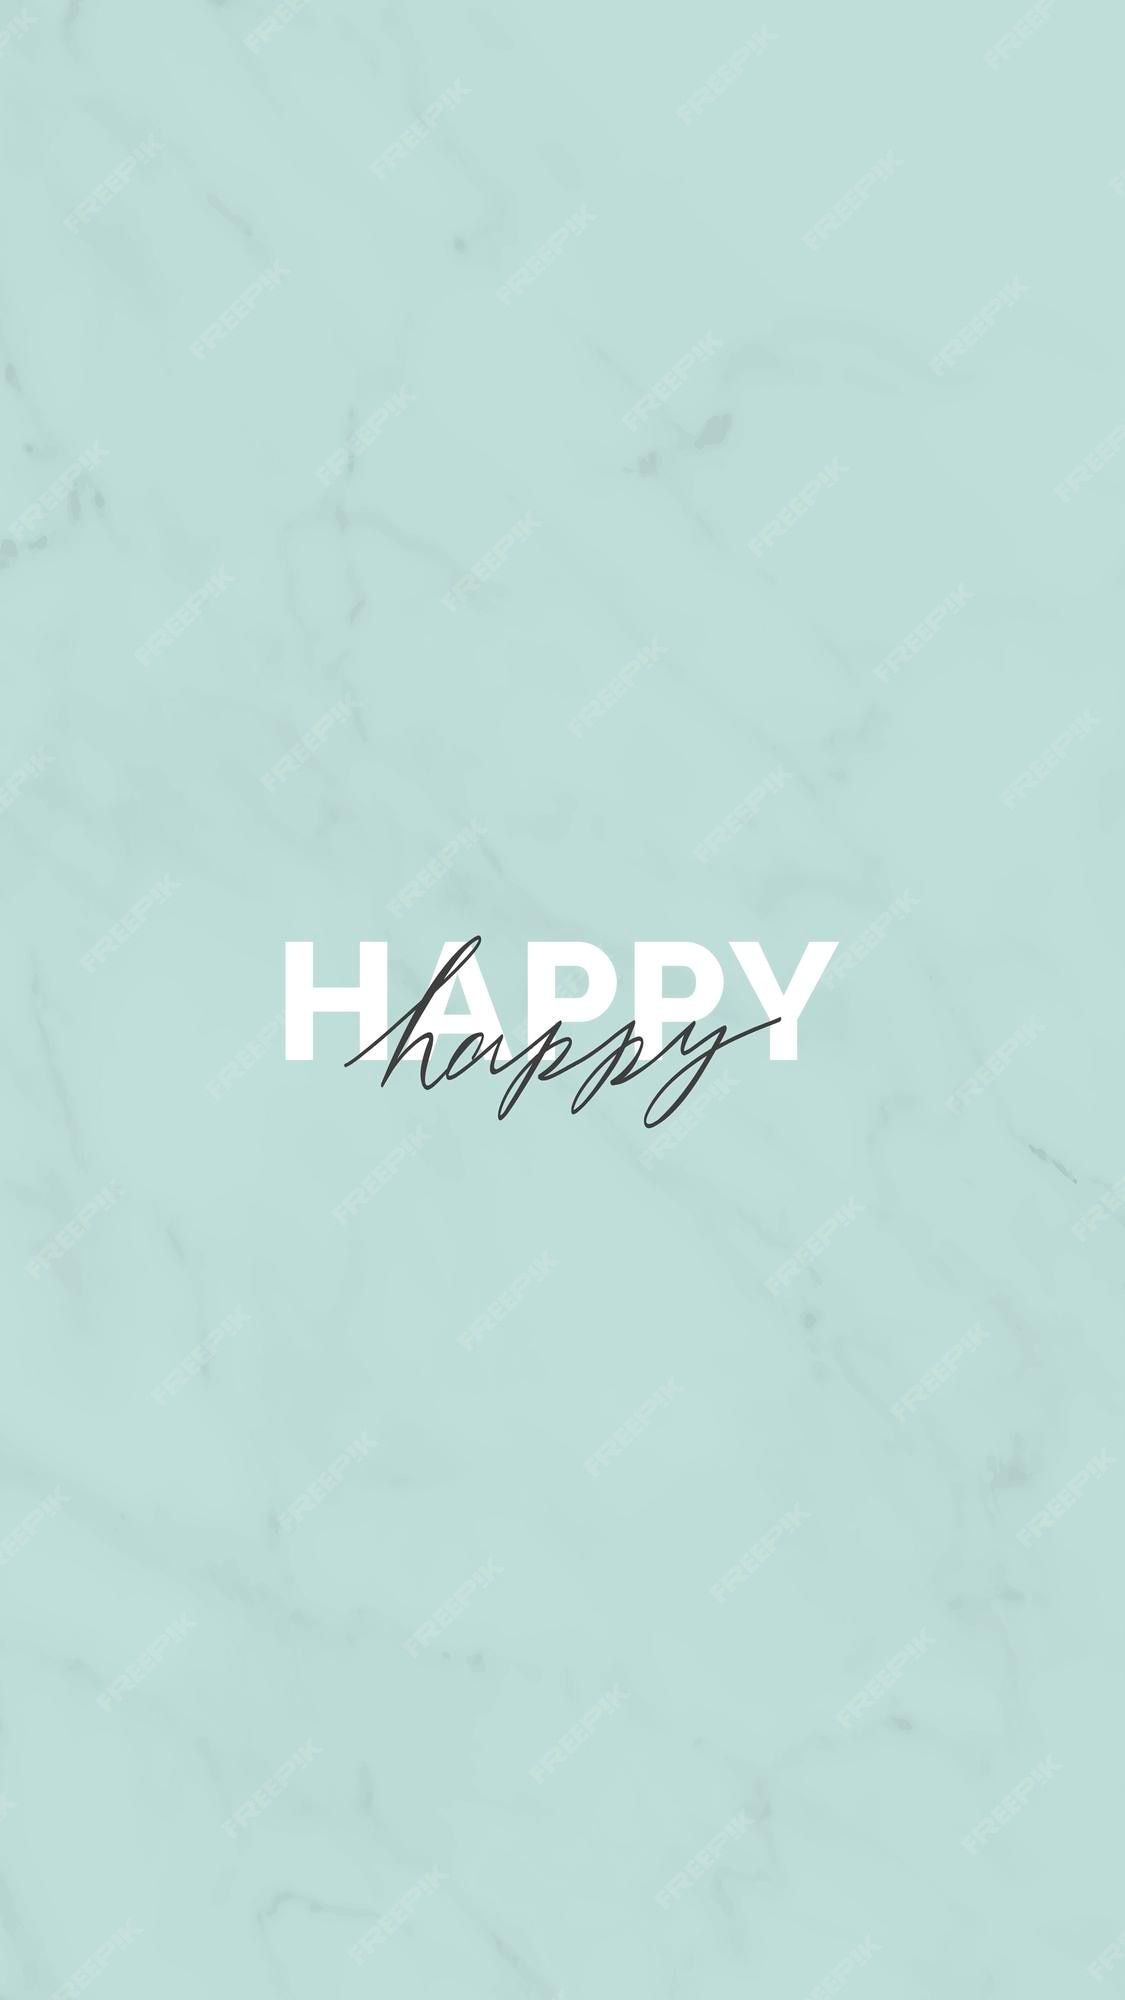 Free Vector. Happy typography on a green background mobile wallpaper vector